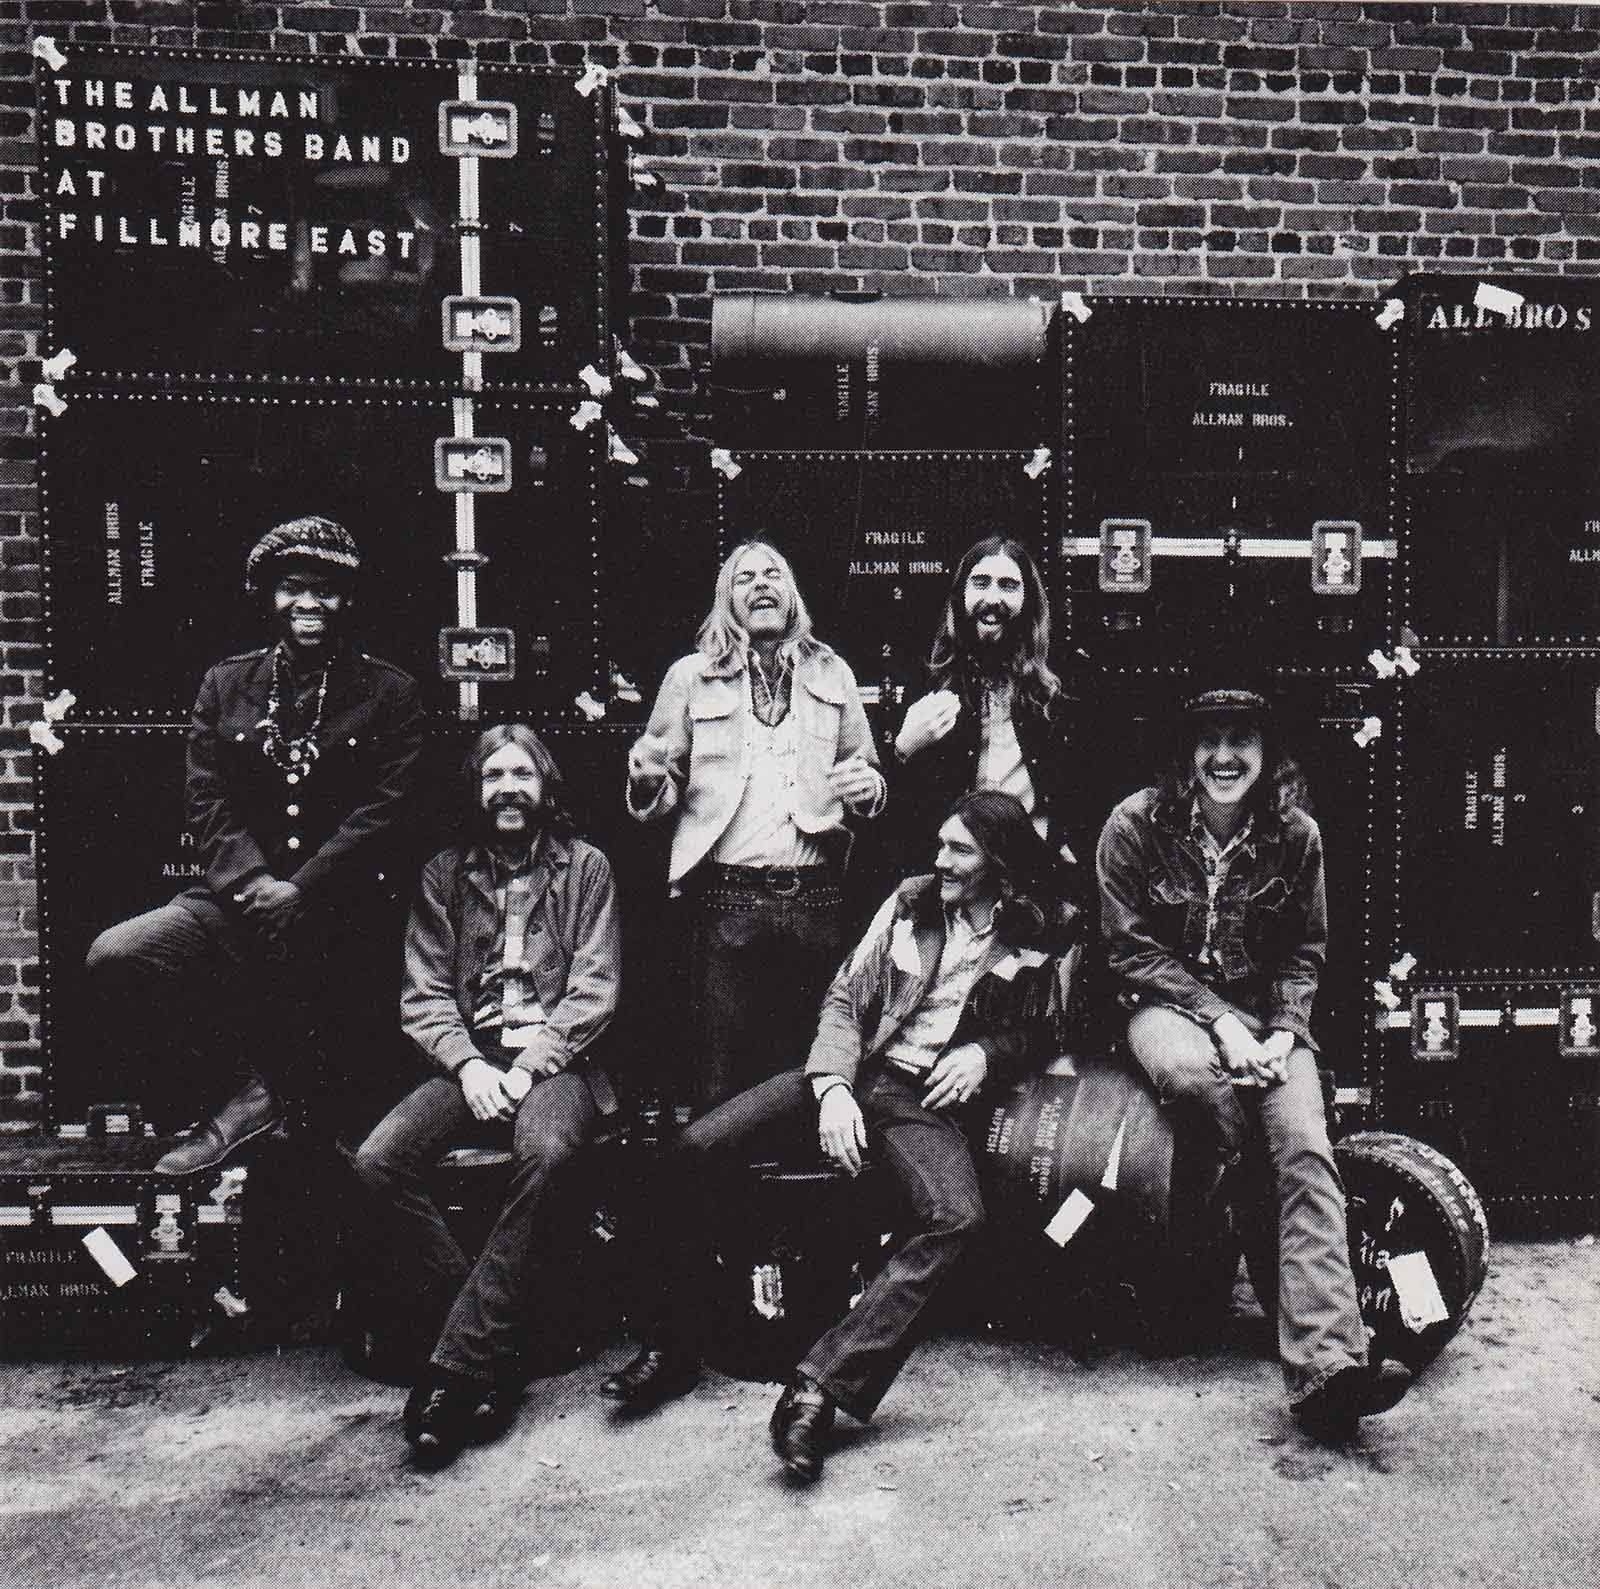 Allman Brothers Band - 1971: At Fillmore East